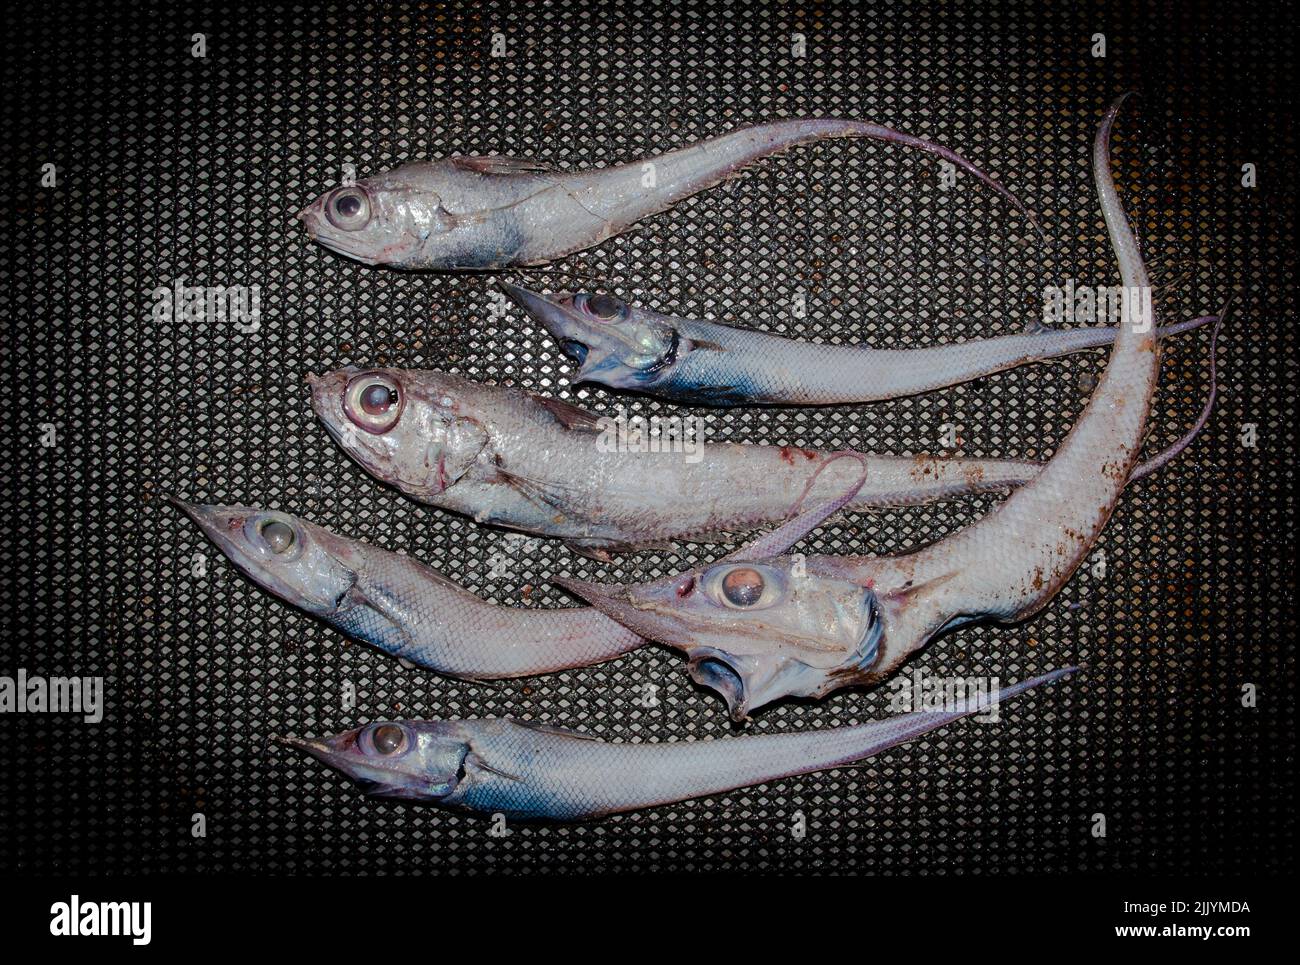 A Look at life in New Zealand: Freshly landed catch (Slickheads:  from a deep-sea trawl. Stock Photo